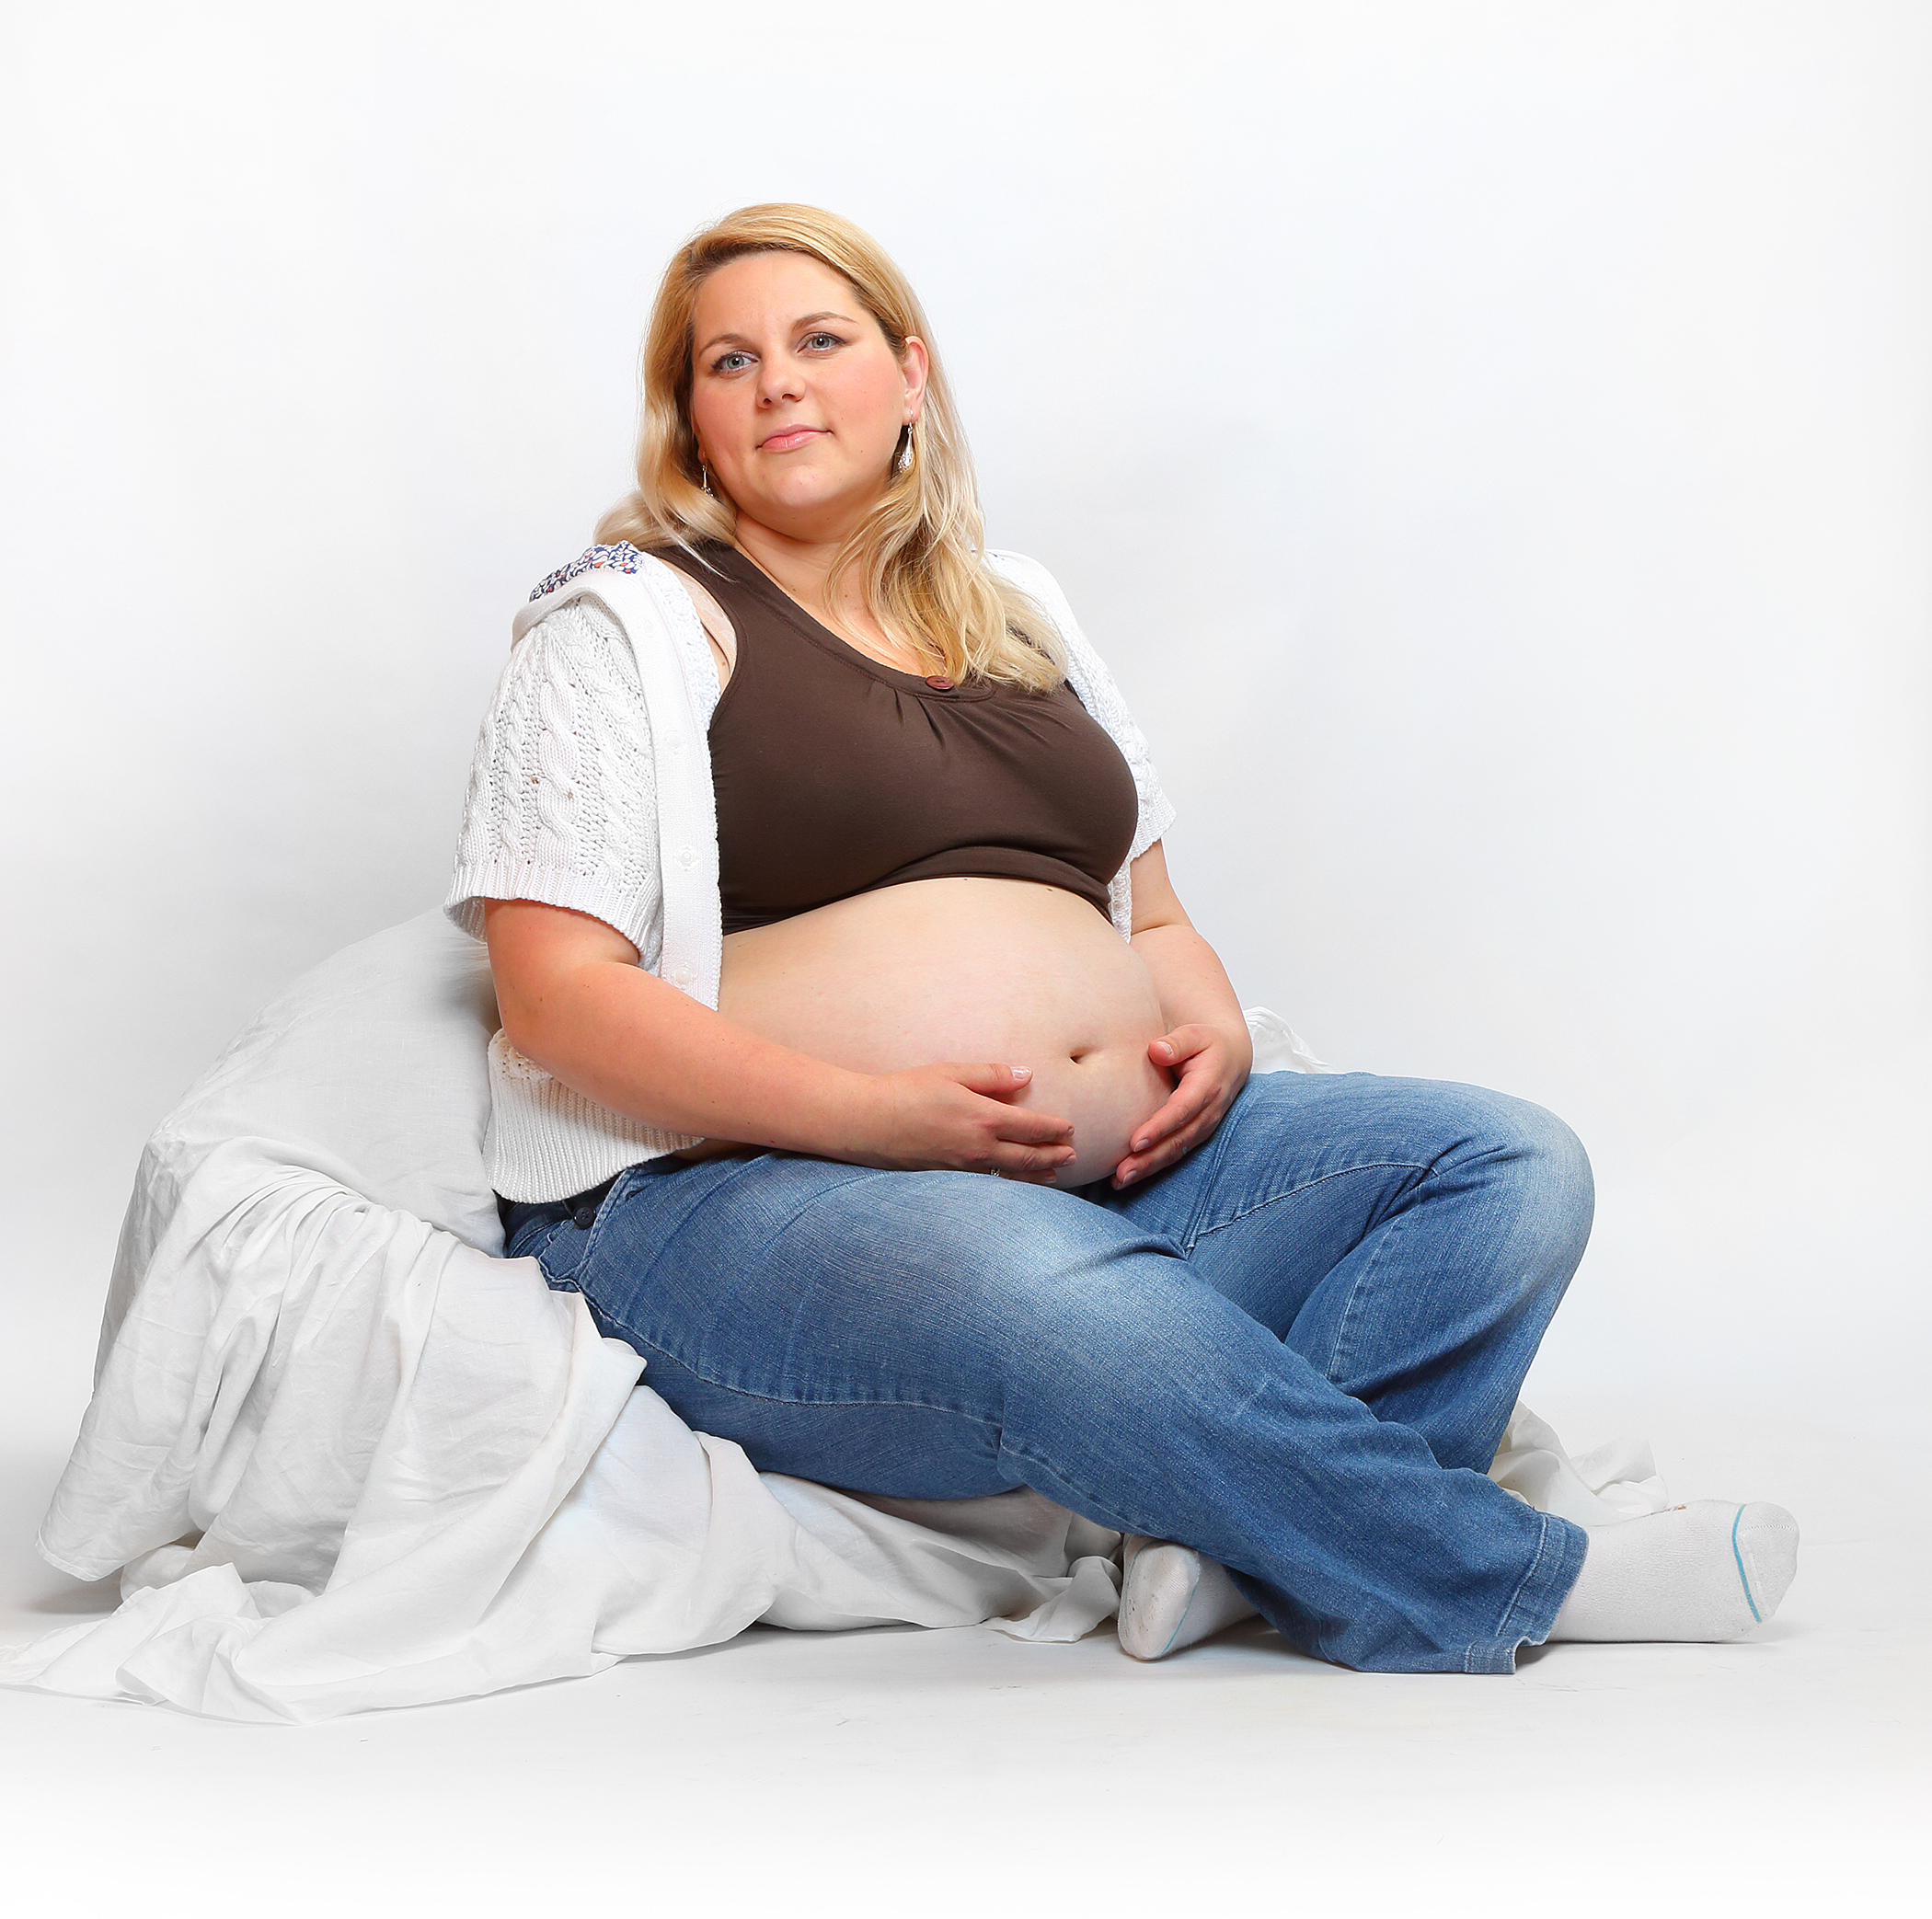 Overweight pregnant woman relaxing in the bedroom. Health and body care concept. Unhealthy lifestyle problems.